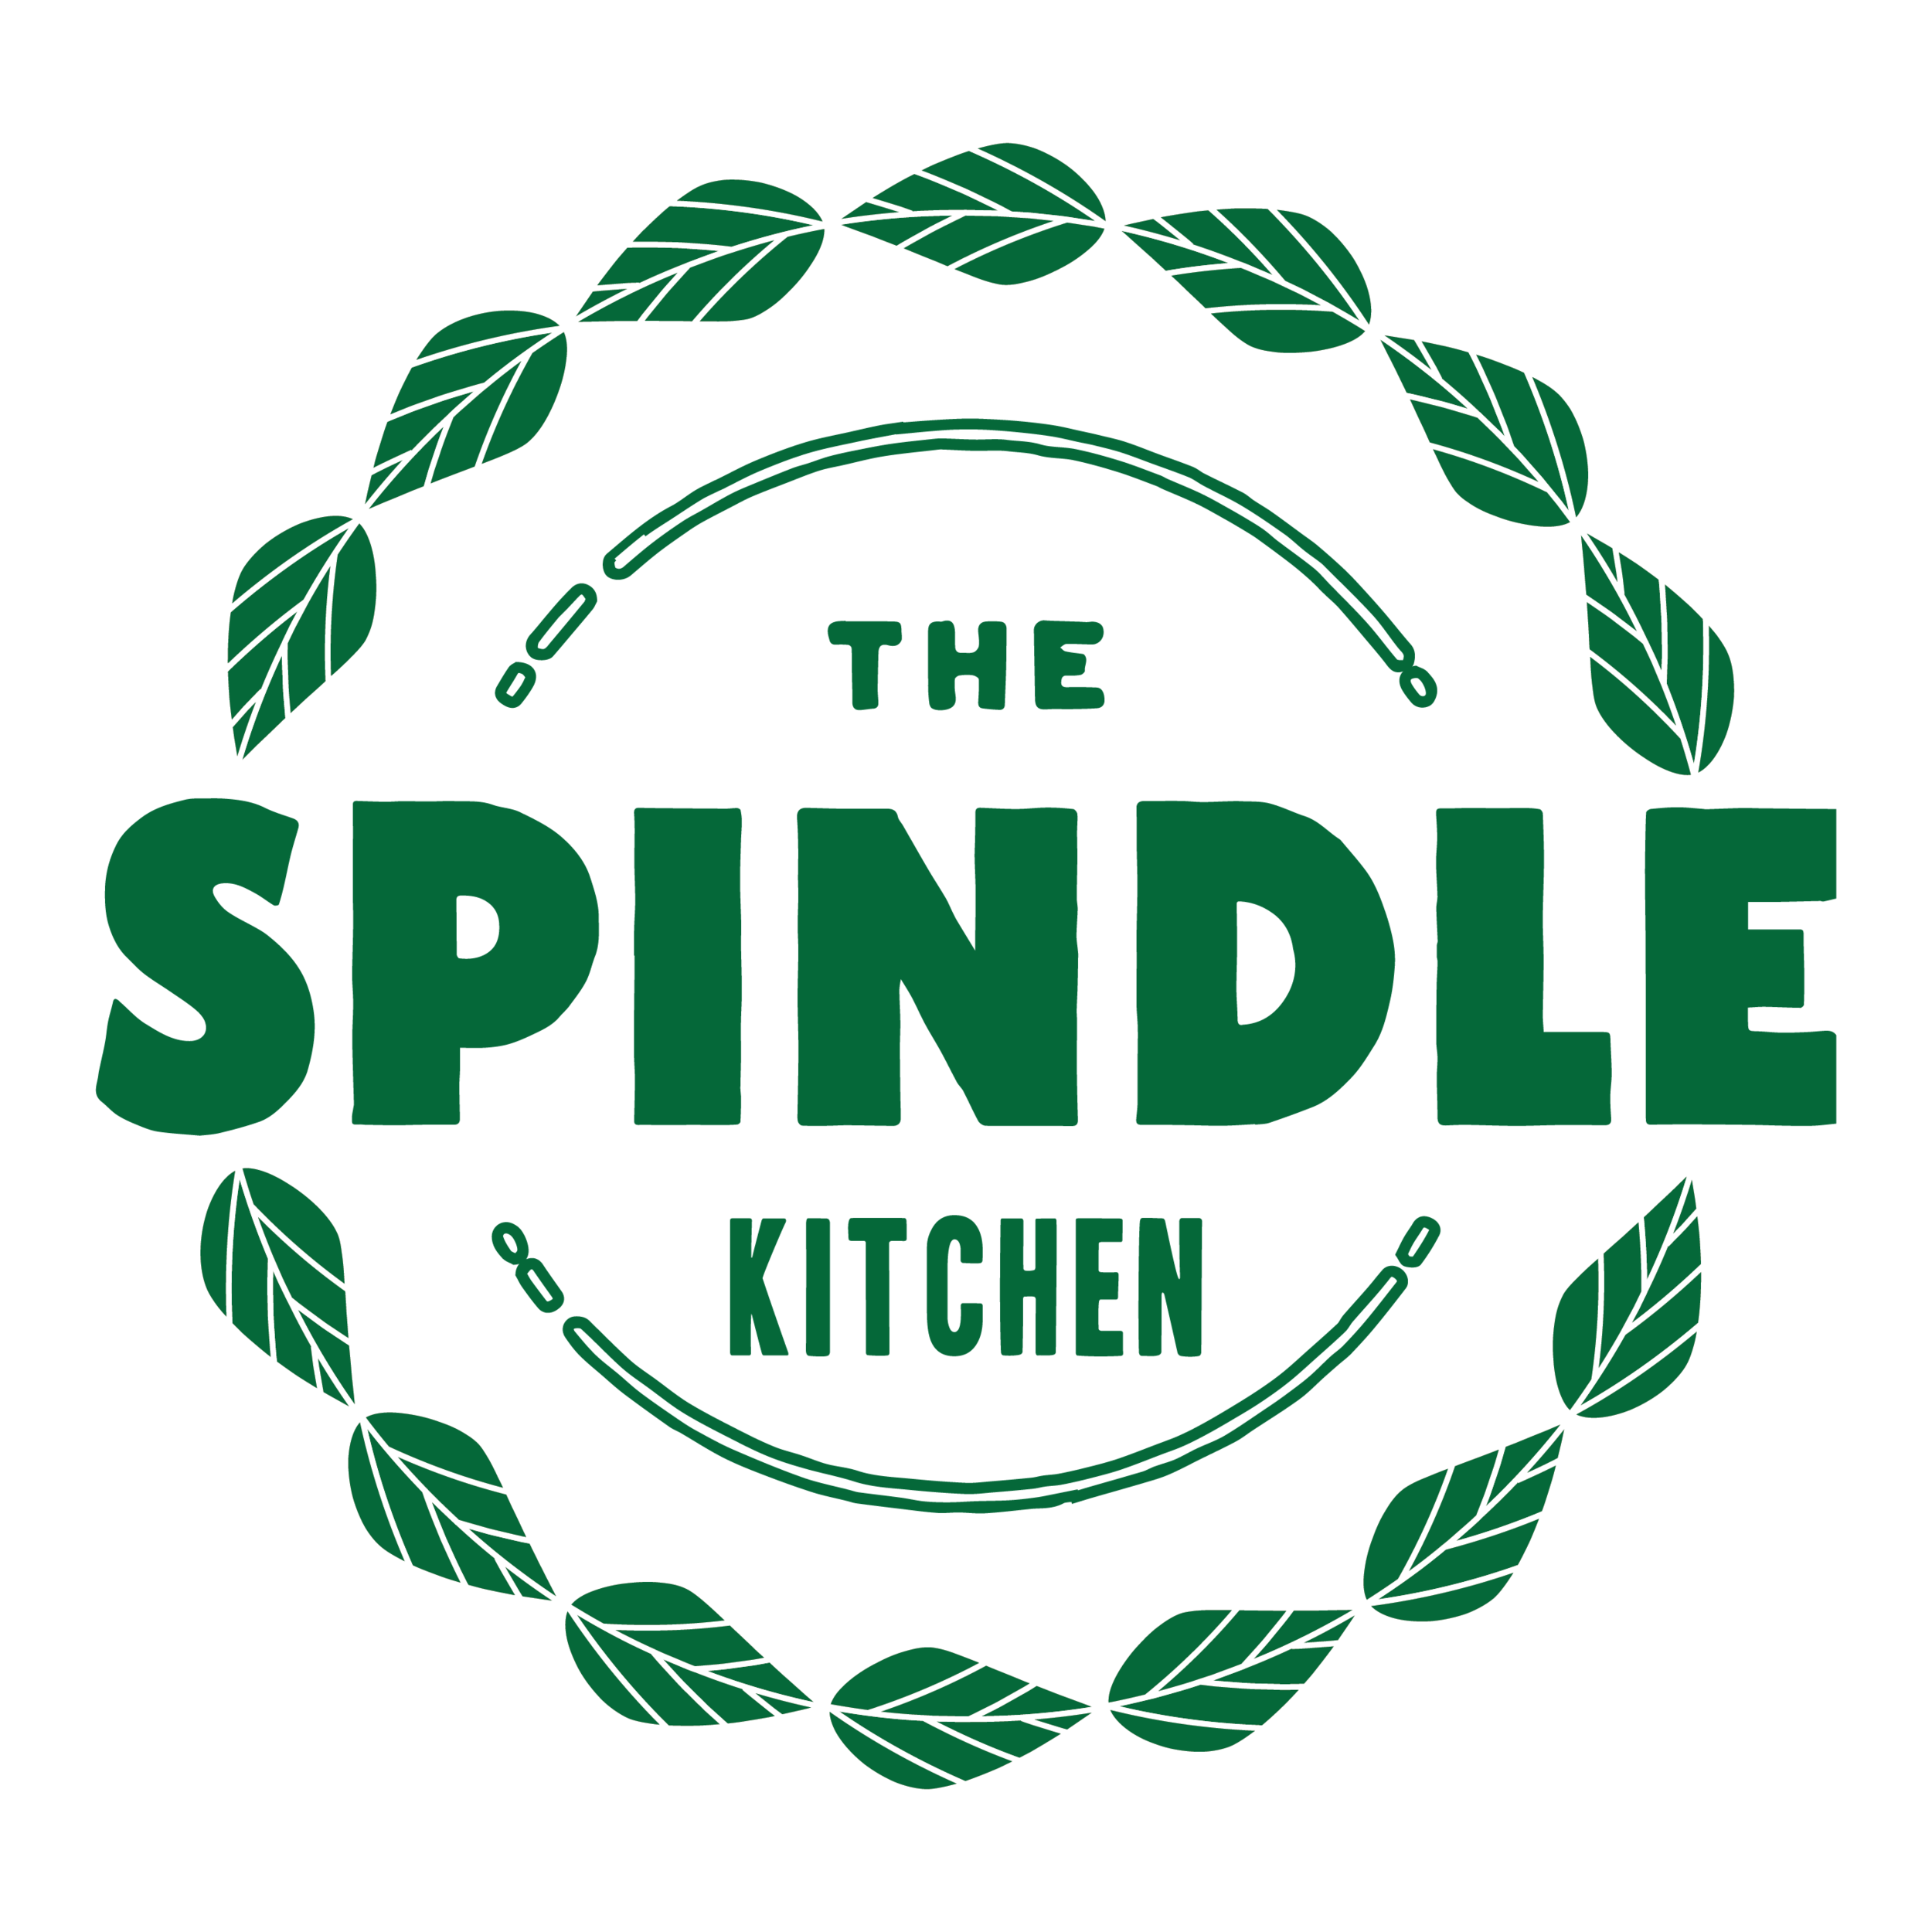 The Spindle Kitchen